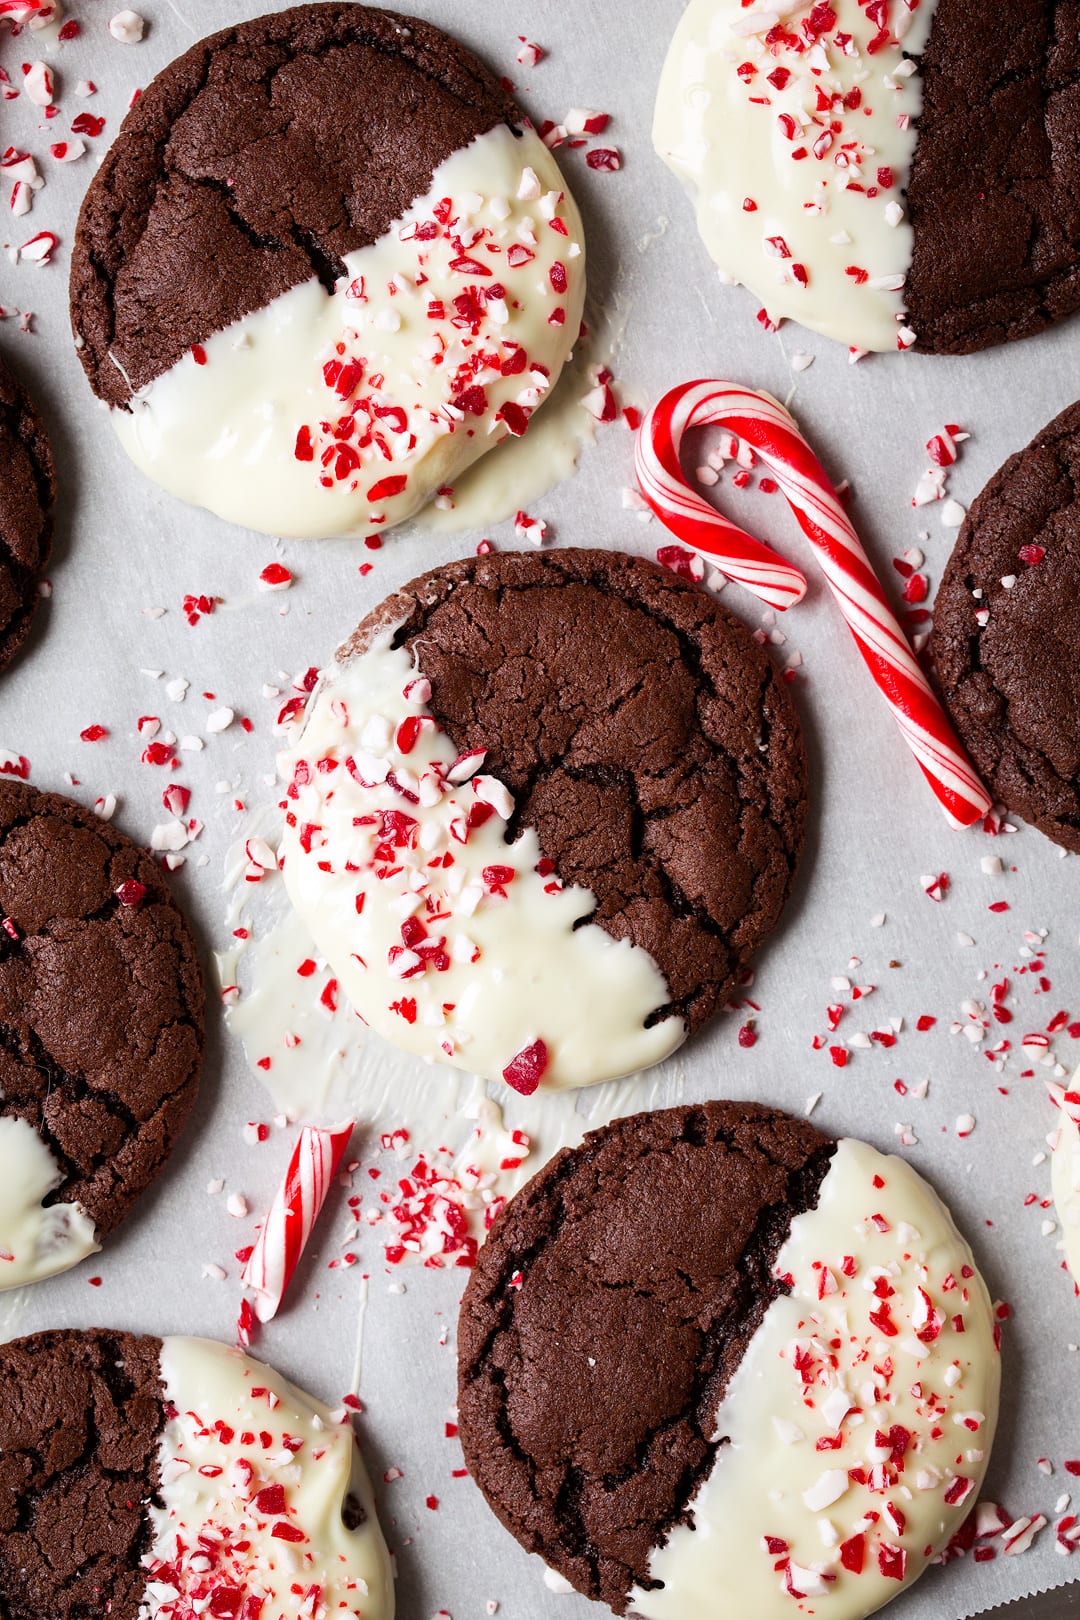 White Chocolate Dipped Peppermint Chocolate Cookies